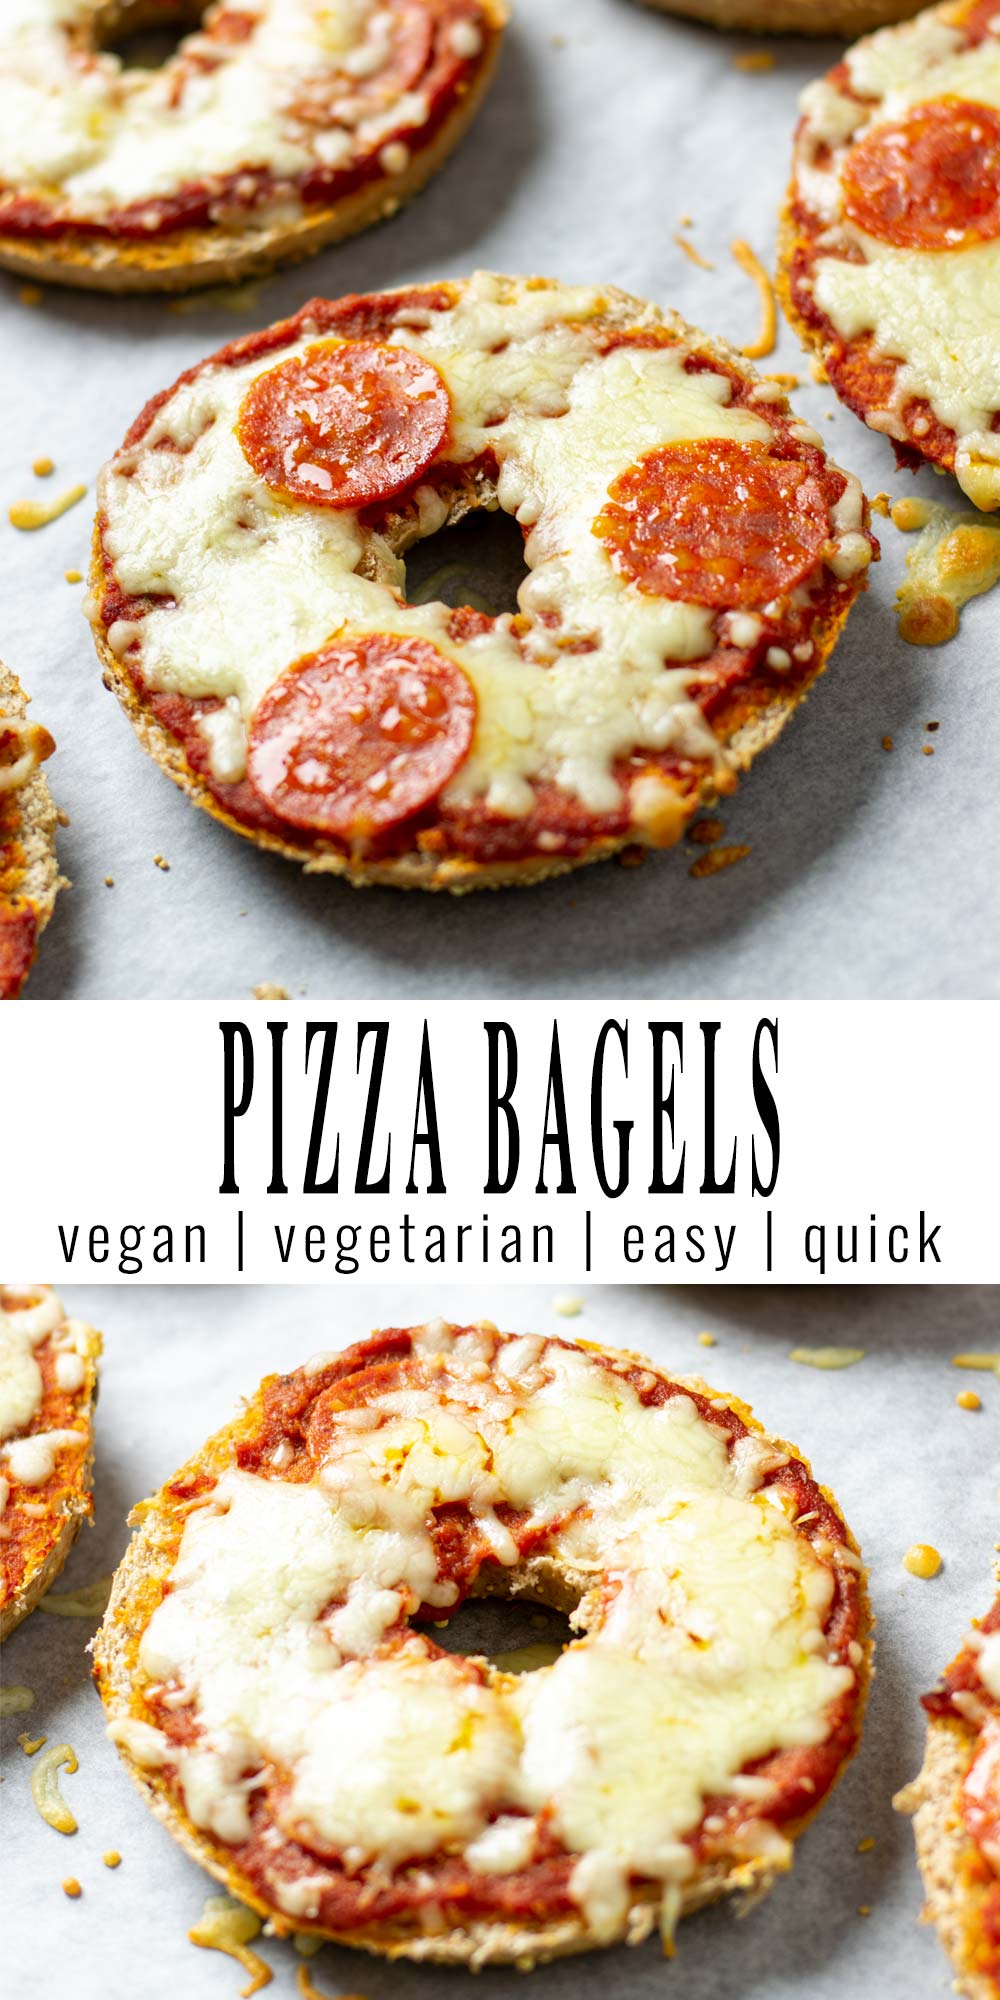 Collage of two pictures of the Pizza Bagels with recipe title text.